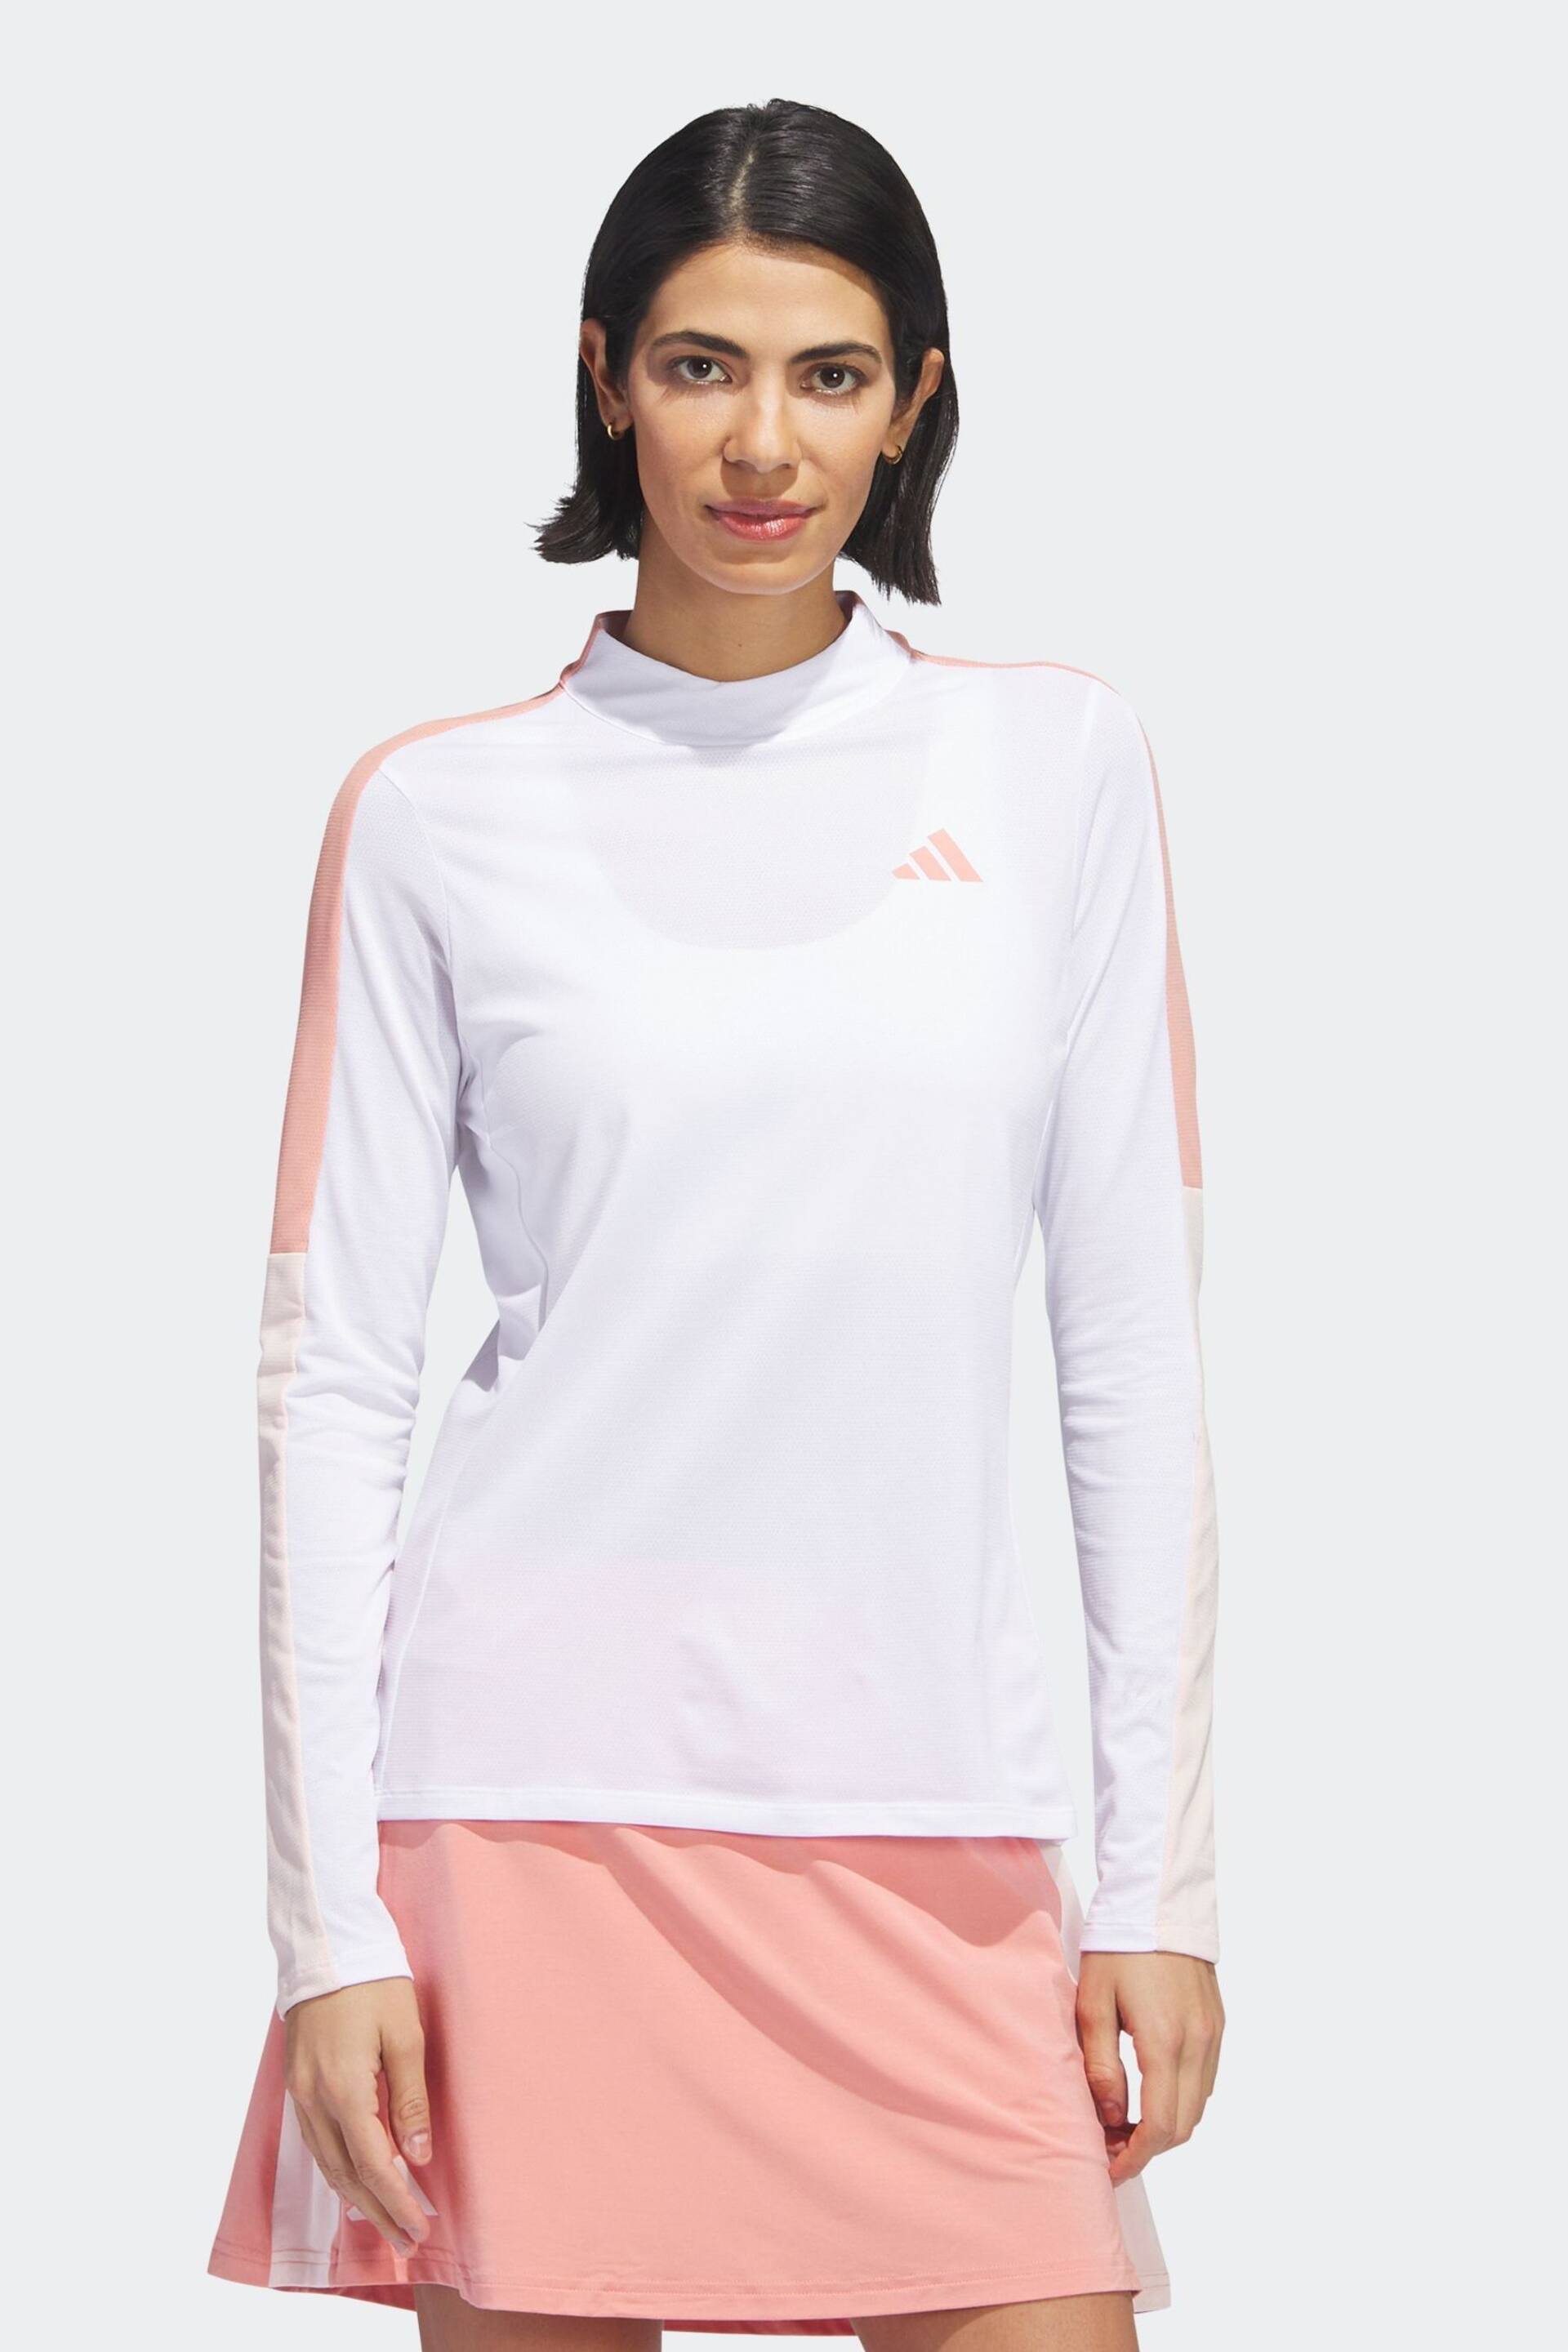 adidas Golf White/Coral Made With Nature Mock Neck Long-Sleeve Top - Image 1 of 7